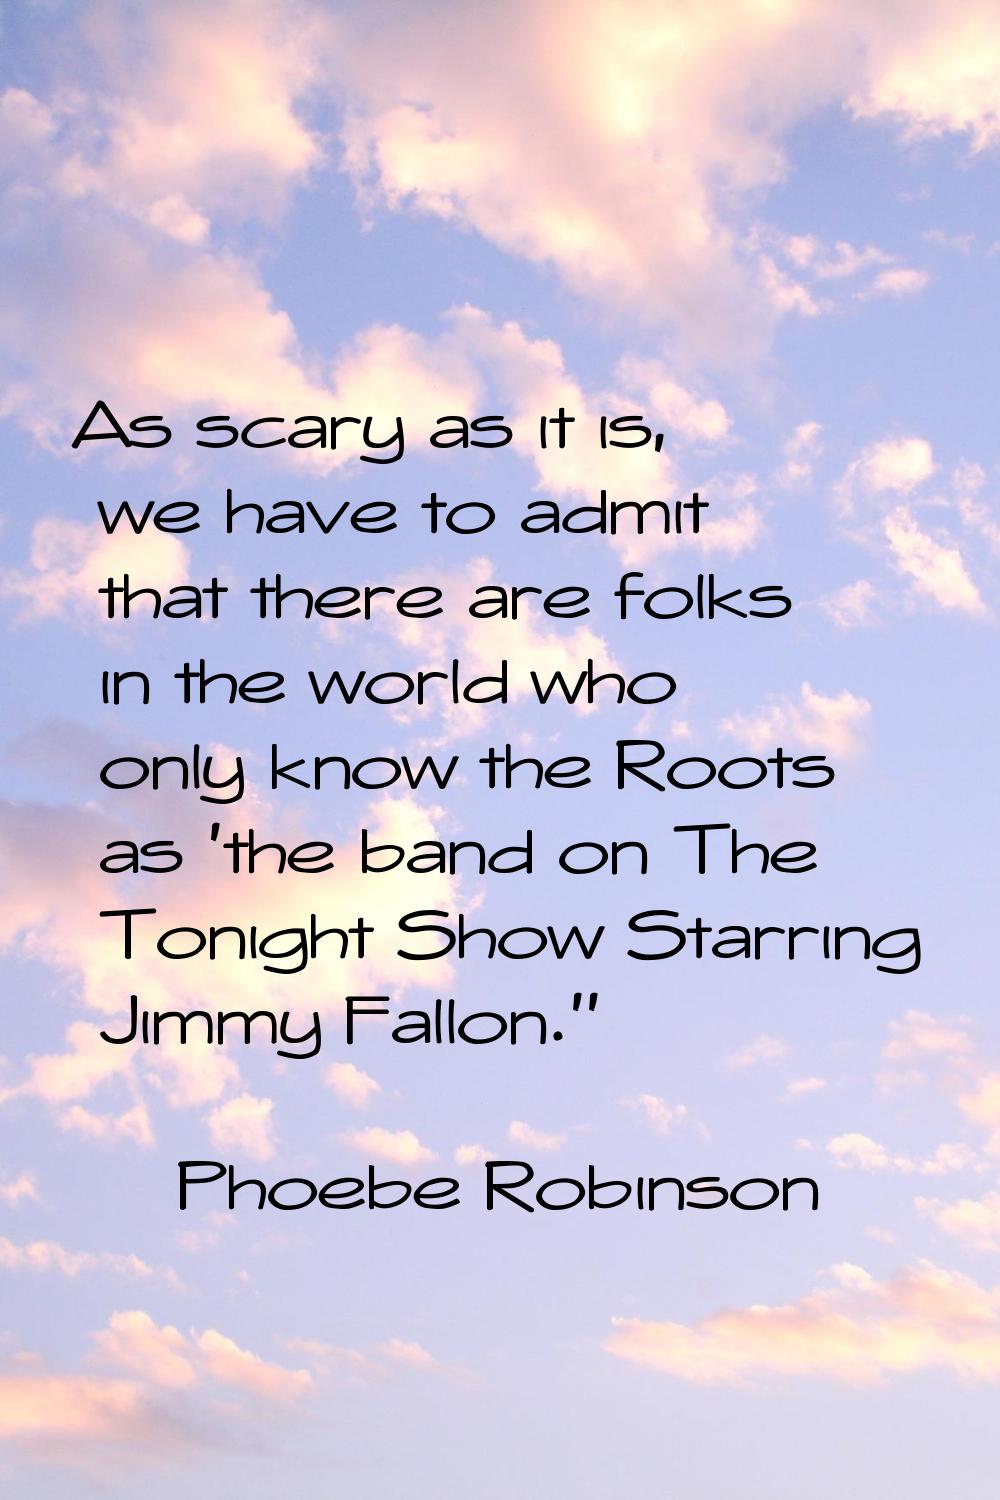 As scary as it is, we have to admit that there are folks in the world who only know the Roots as 't